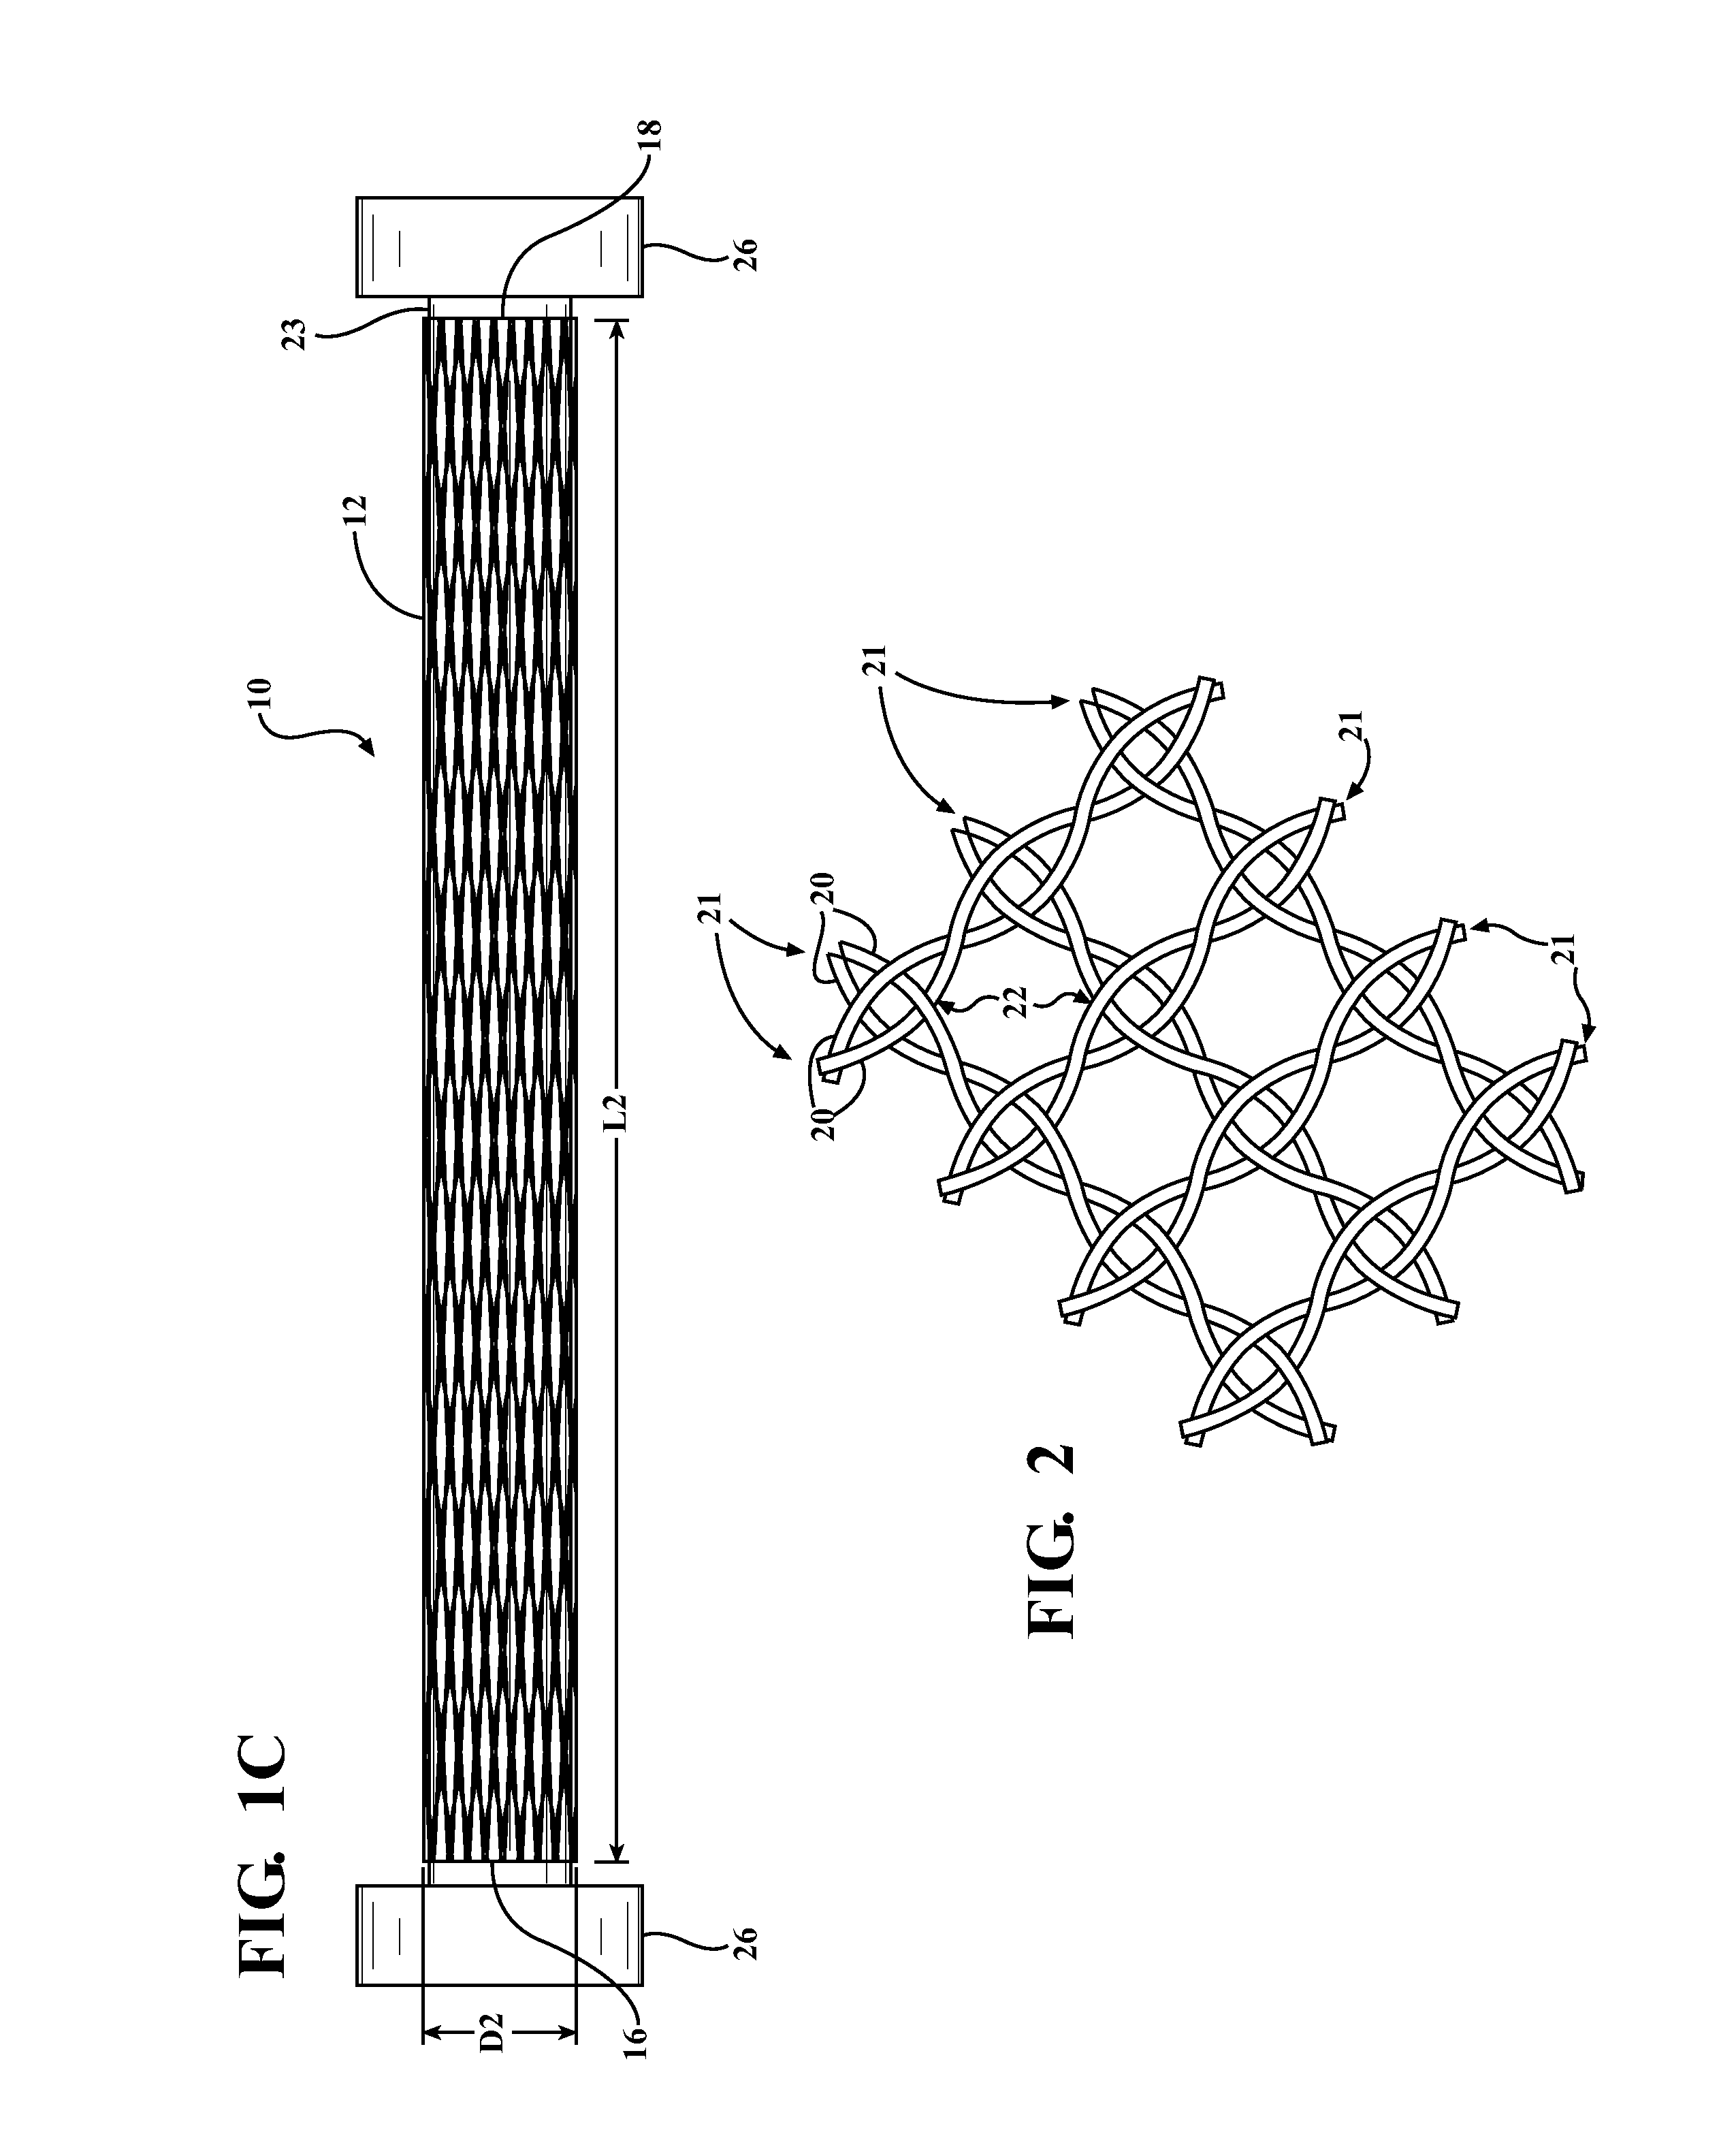 Braided textile sleeve with self-sustaining expanded and contracted states and method of construction thereof